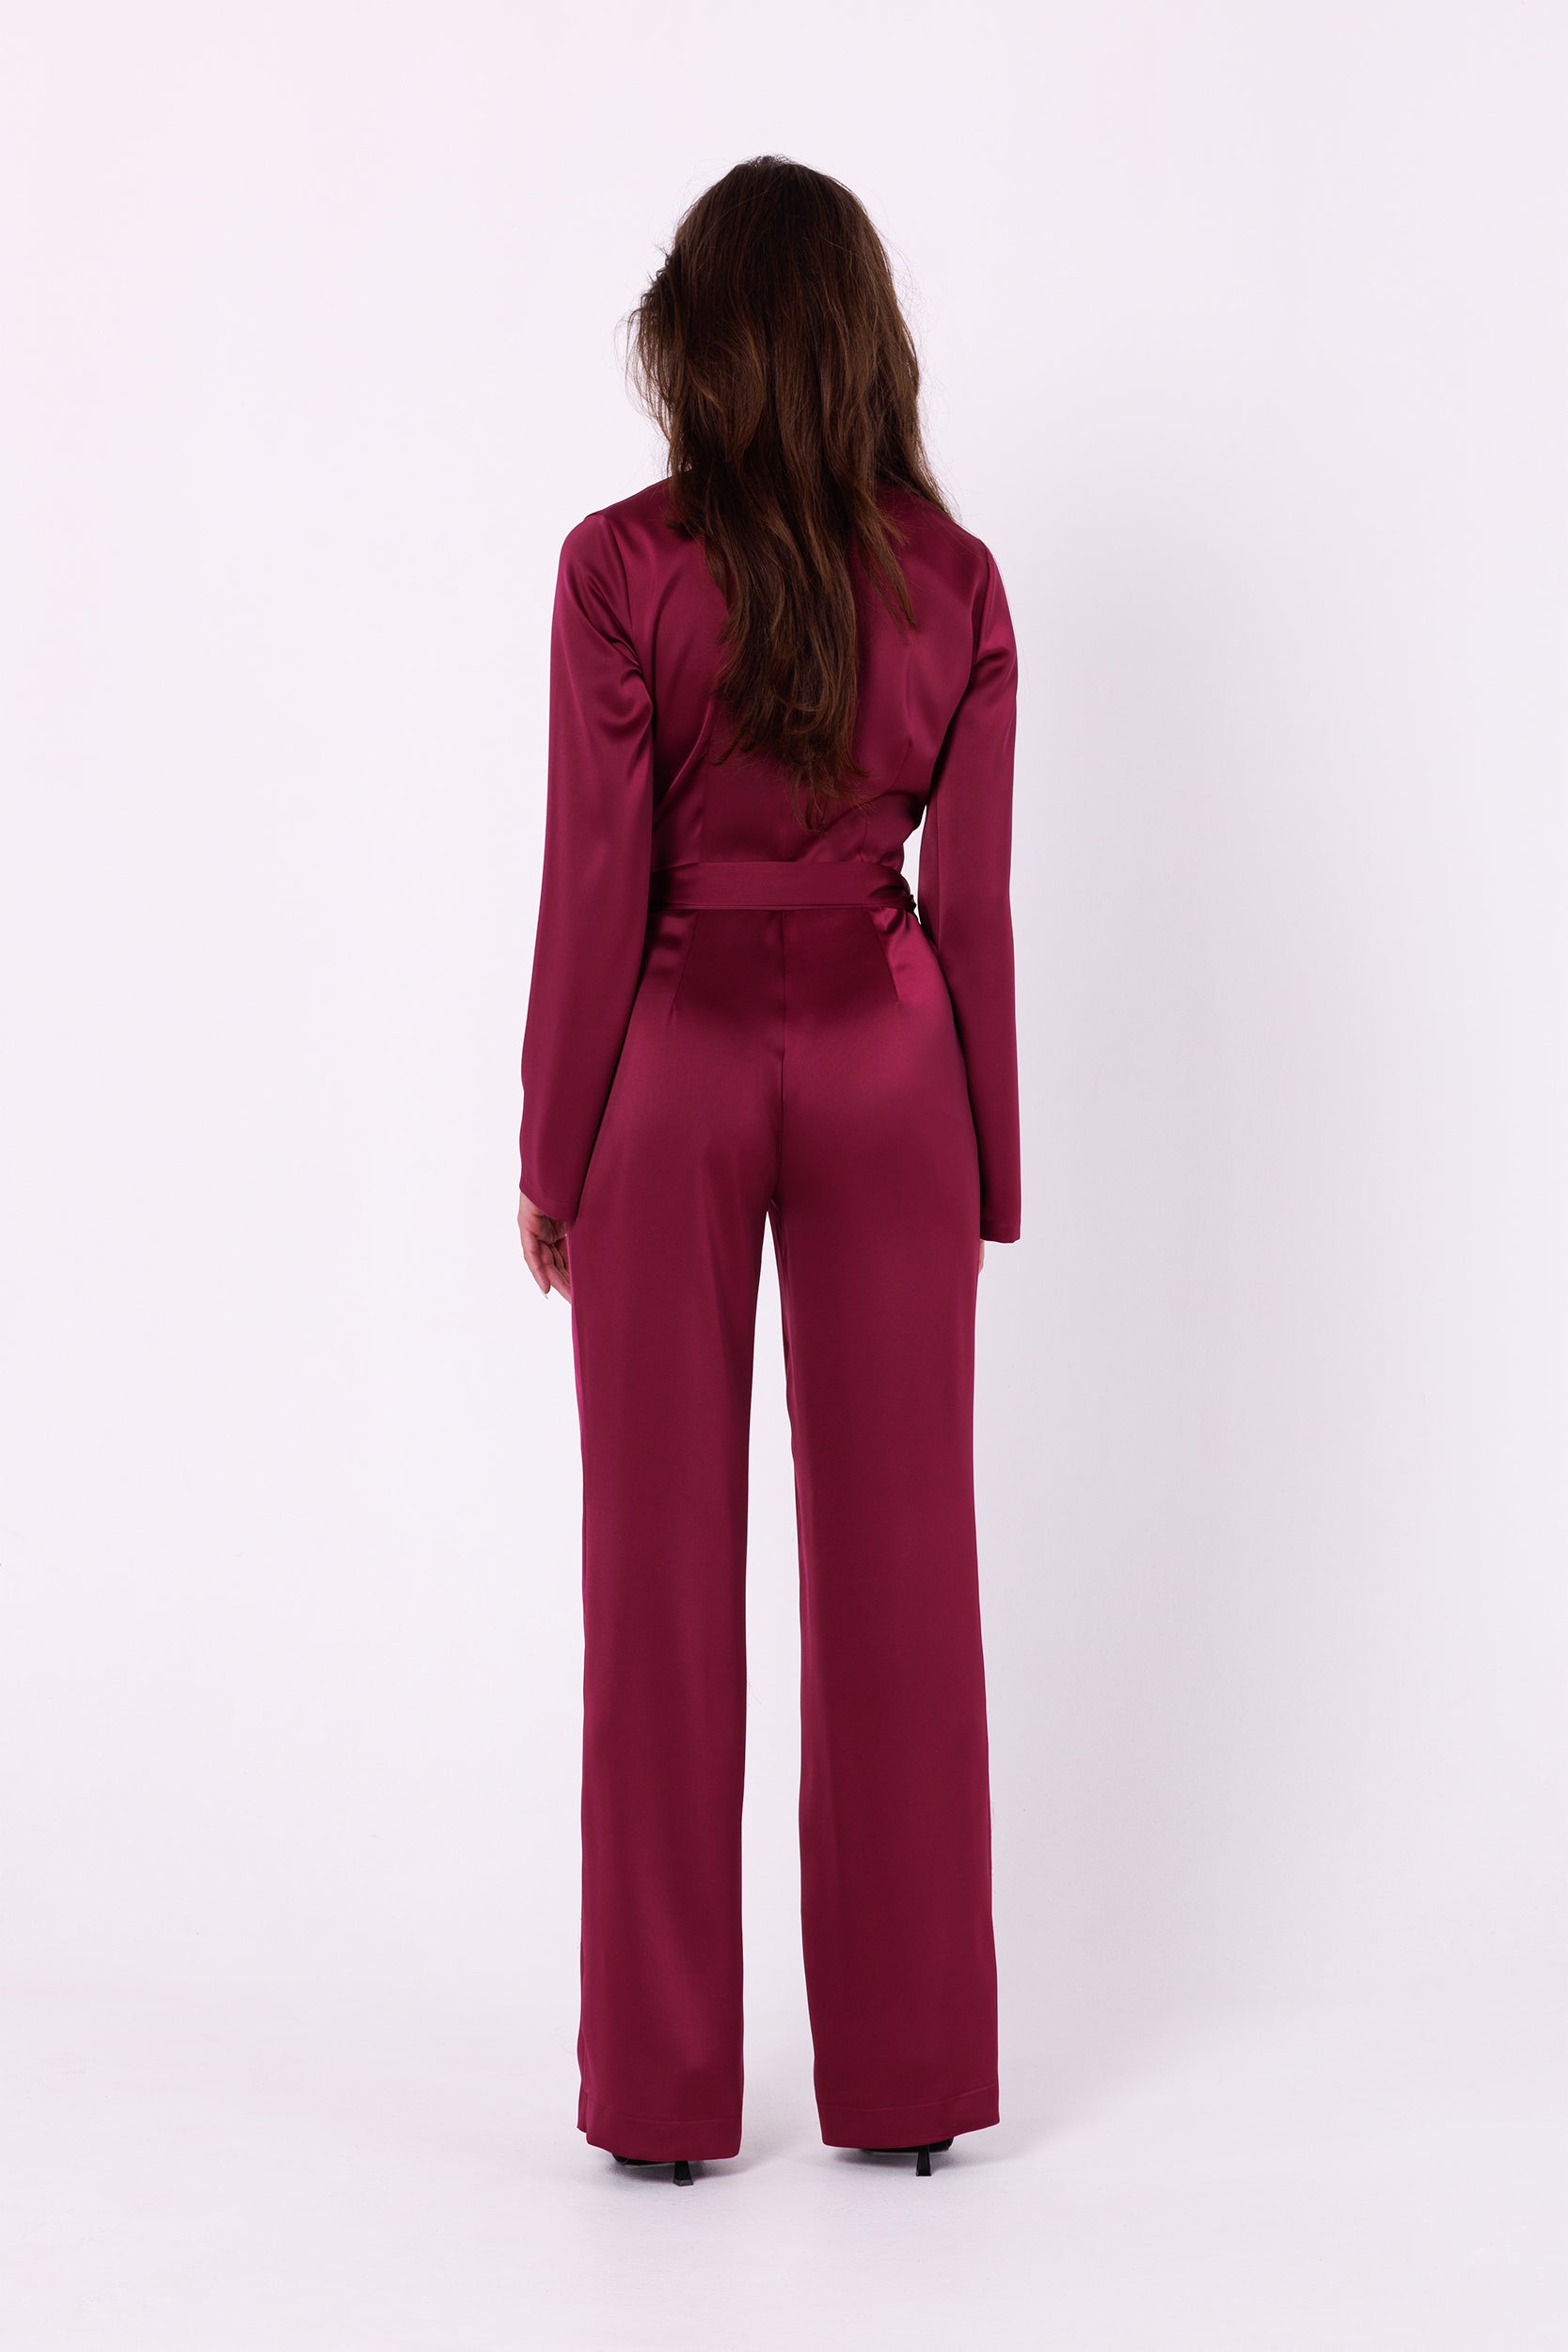 Long Sleeve Wine Red Satin Jumpsuit | Strictly In | Make a statement at your next event with our Long Sleeve Satin Jumpsuit. Crafted from luxurious satin, it features a V-neck, long sleeves, and a tied waist for a glamorous yet comfortable look. Perfect for the party season.